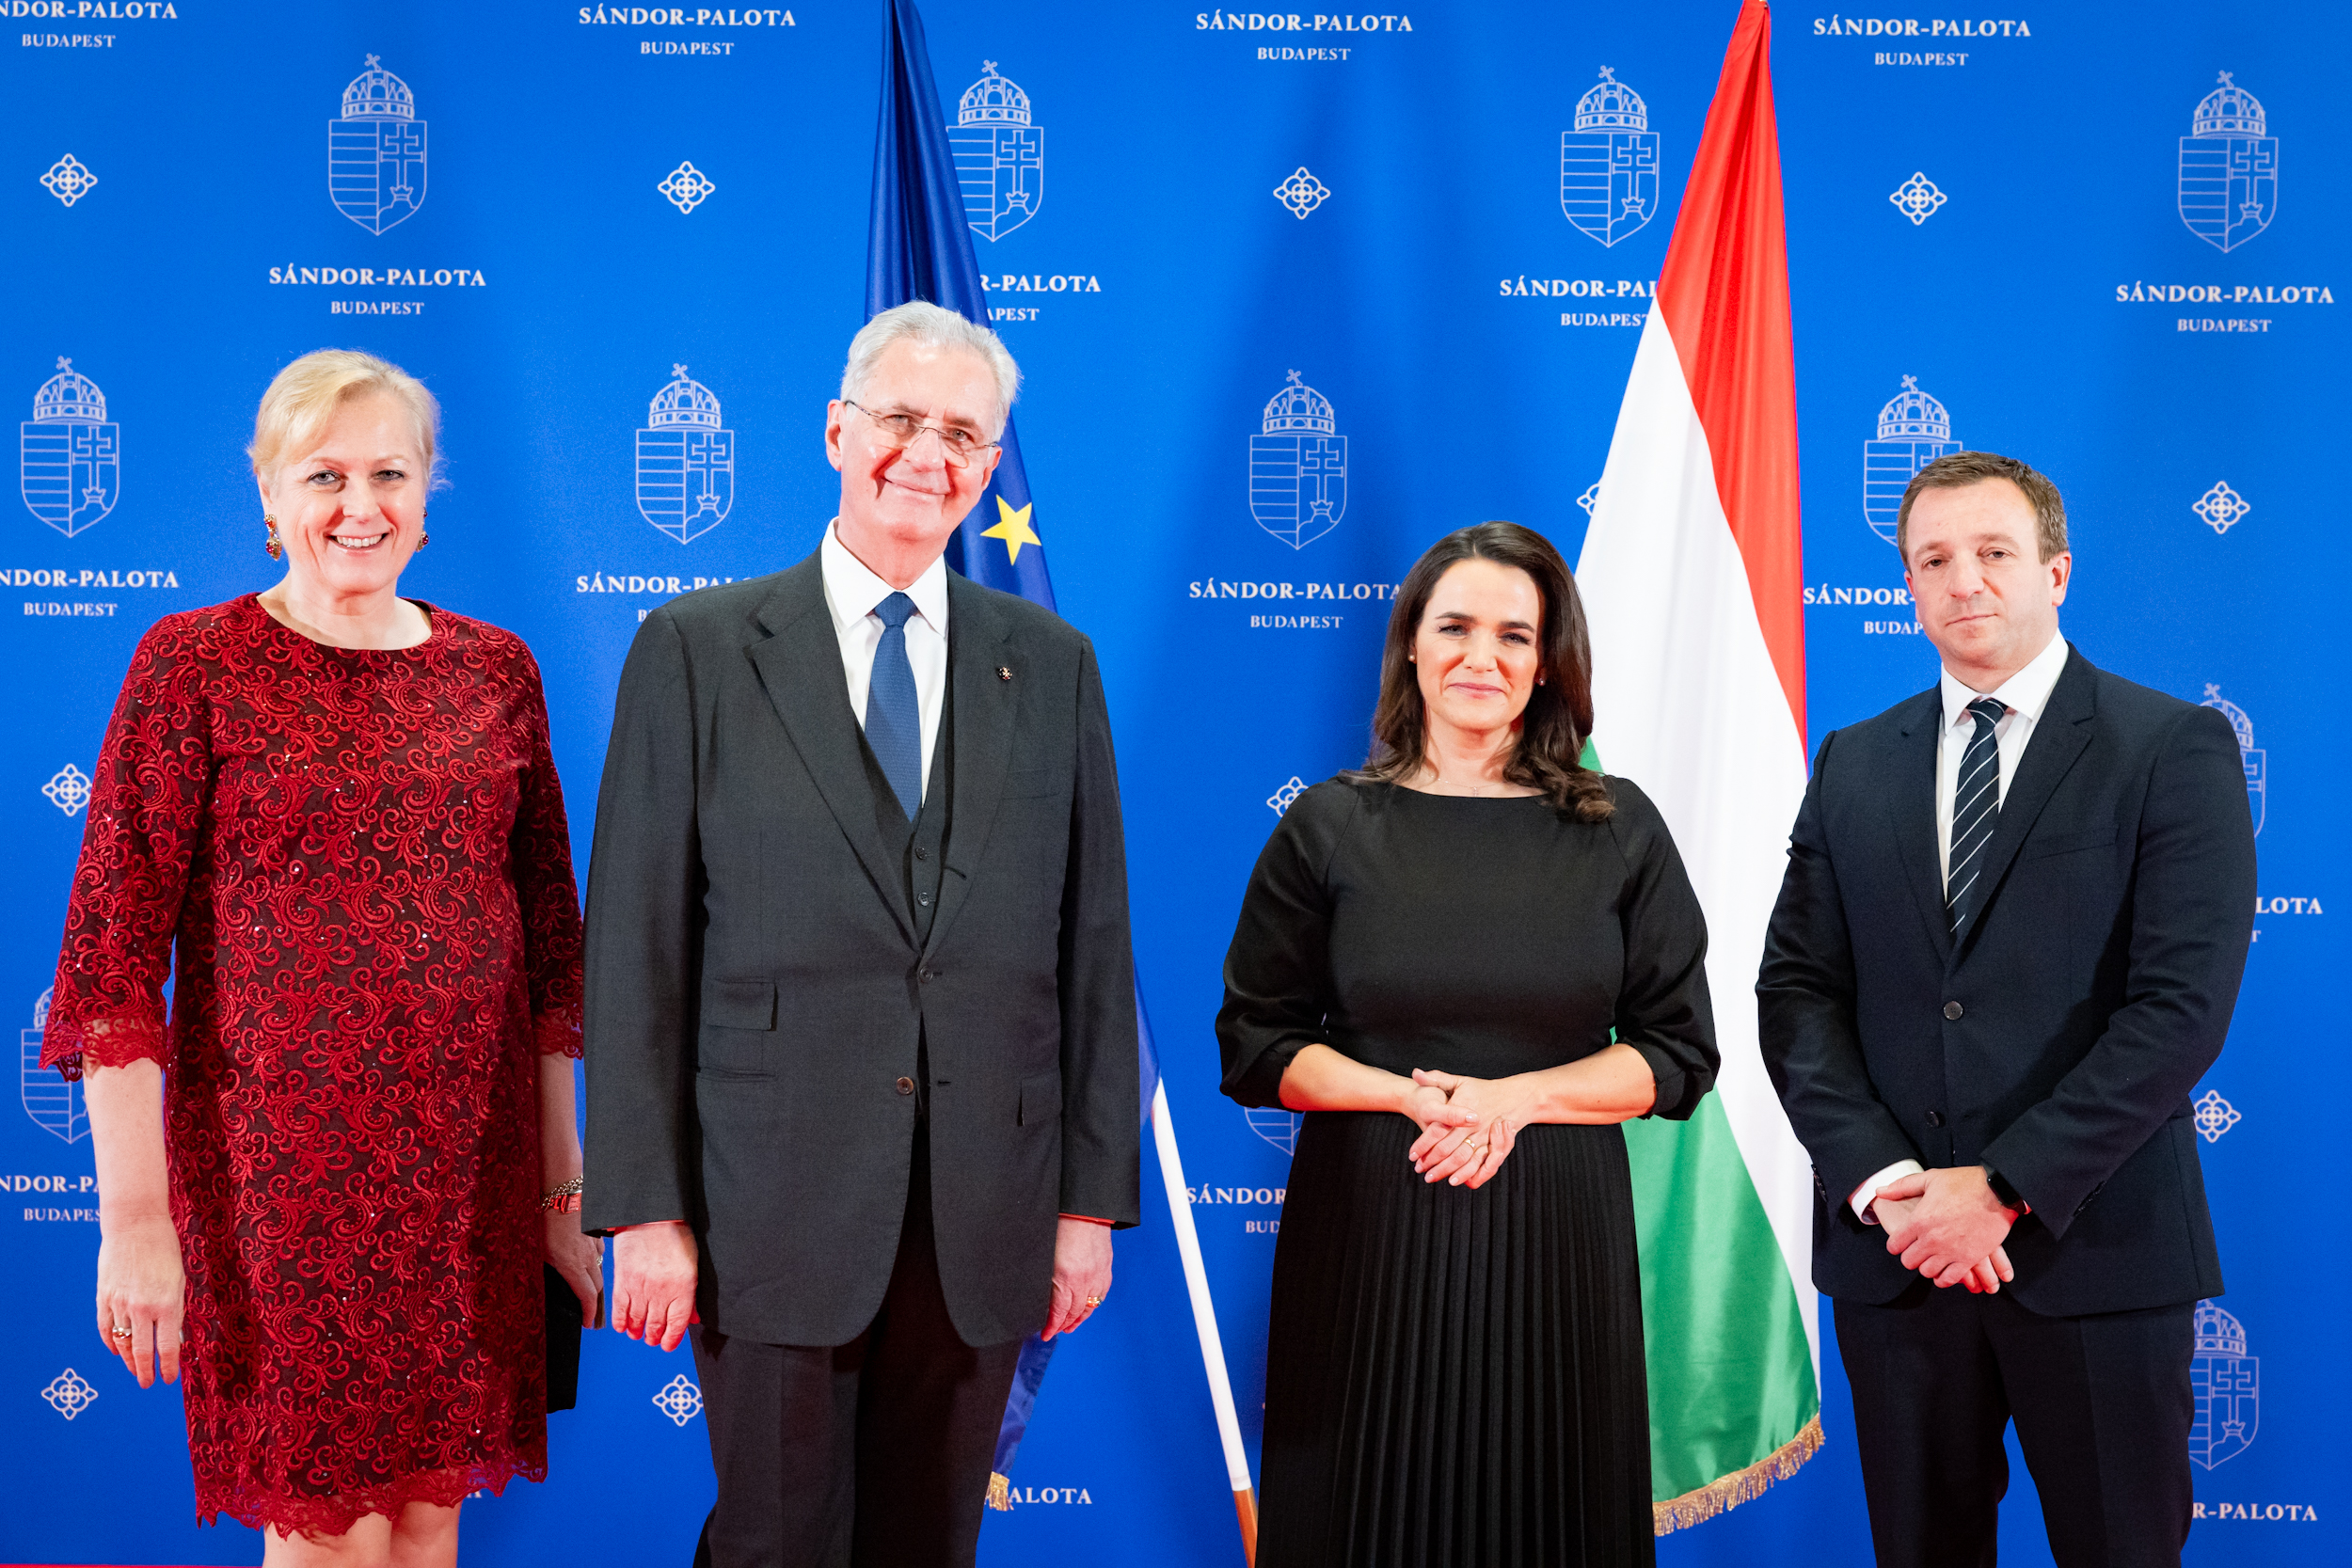 The New Year’s Greeting of the Diplomatic Corps to the President of Hungary